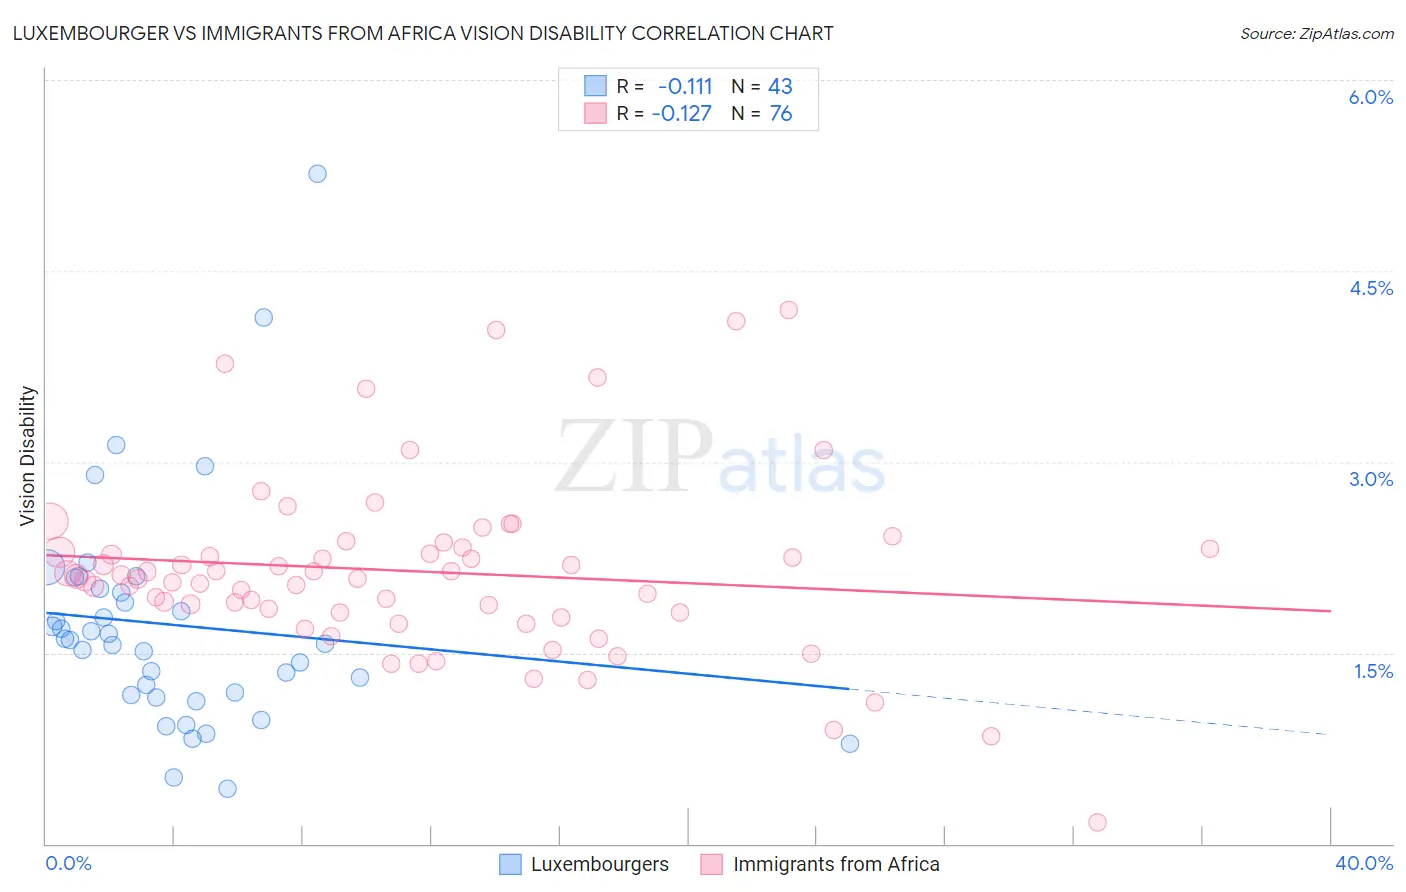 Luxembourger vs Immigrants from Africa Vision Disability